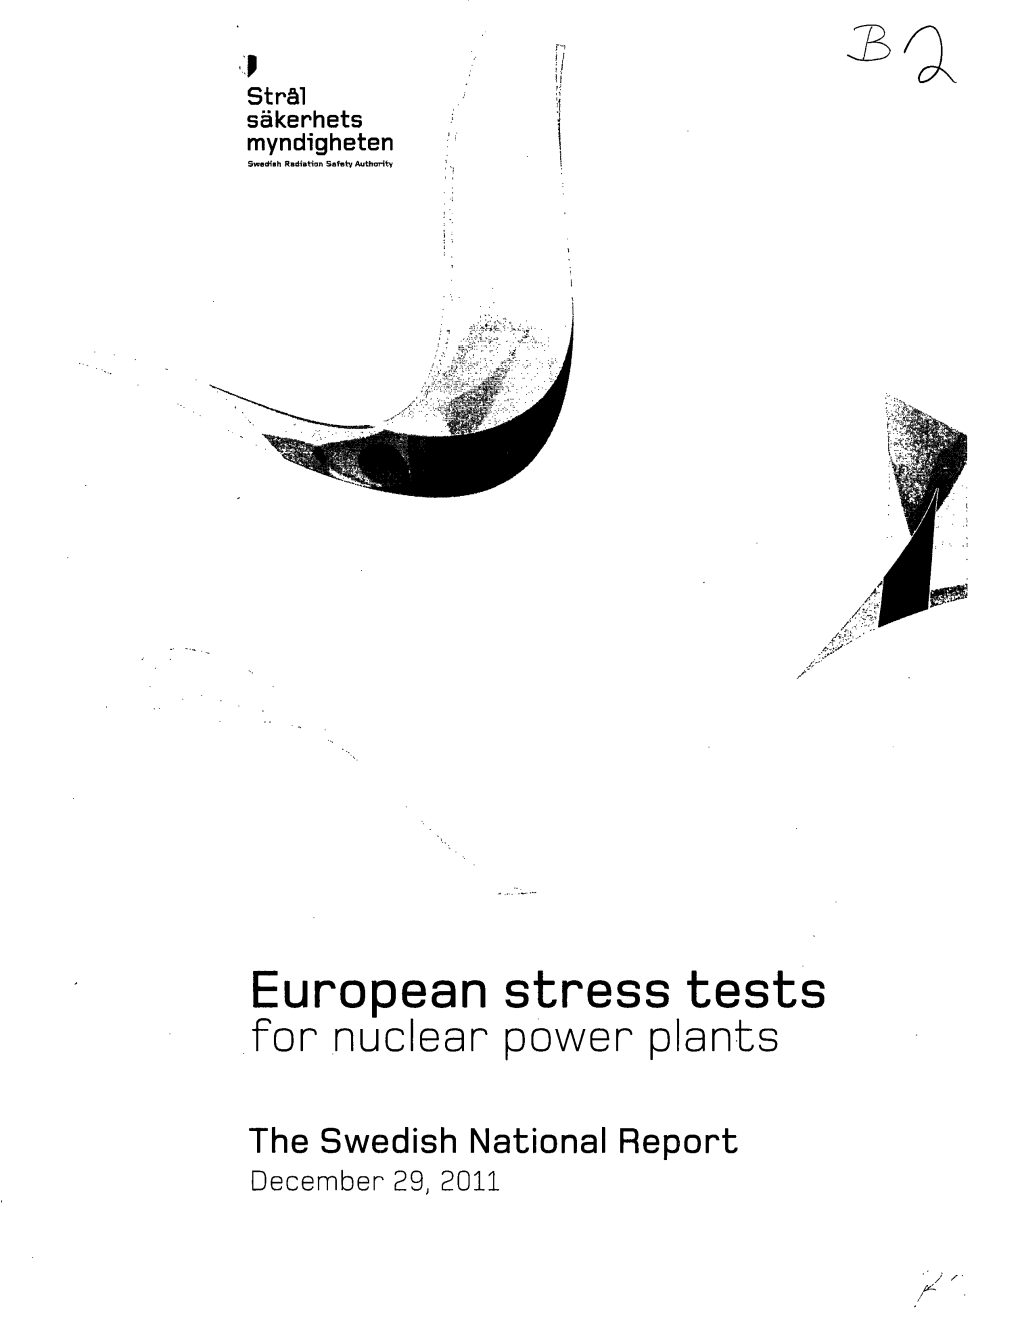 (SSM) Report: European Street Tests for Nuclear Power Plants